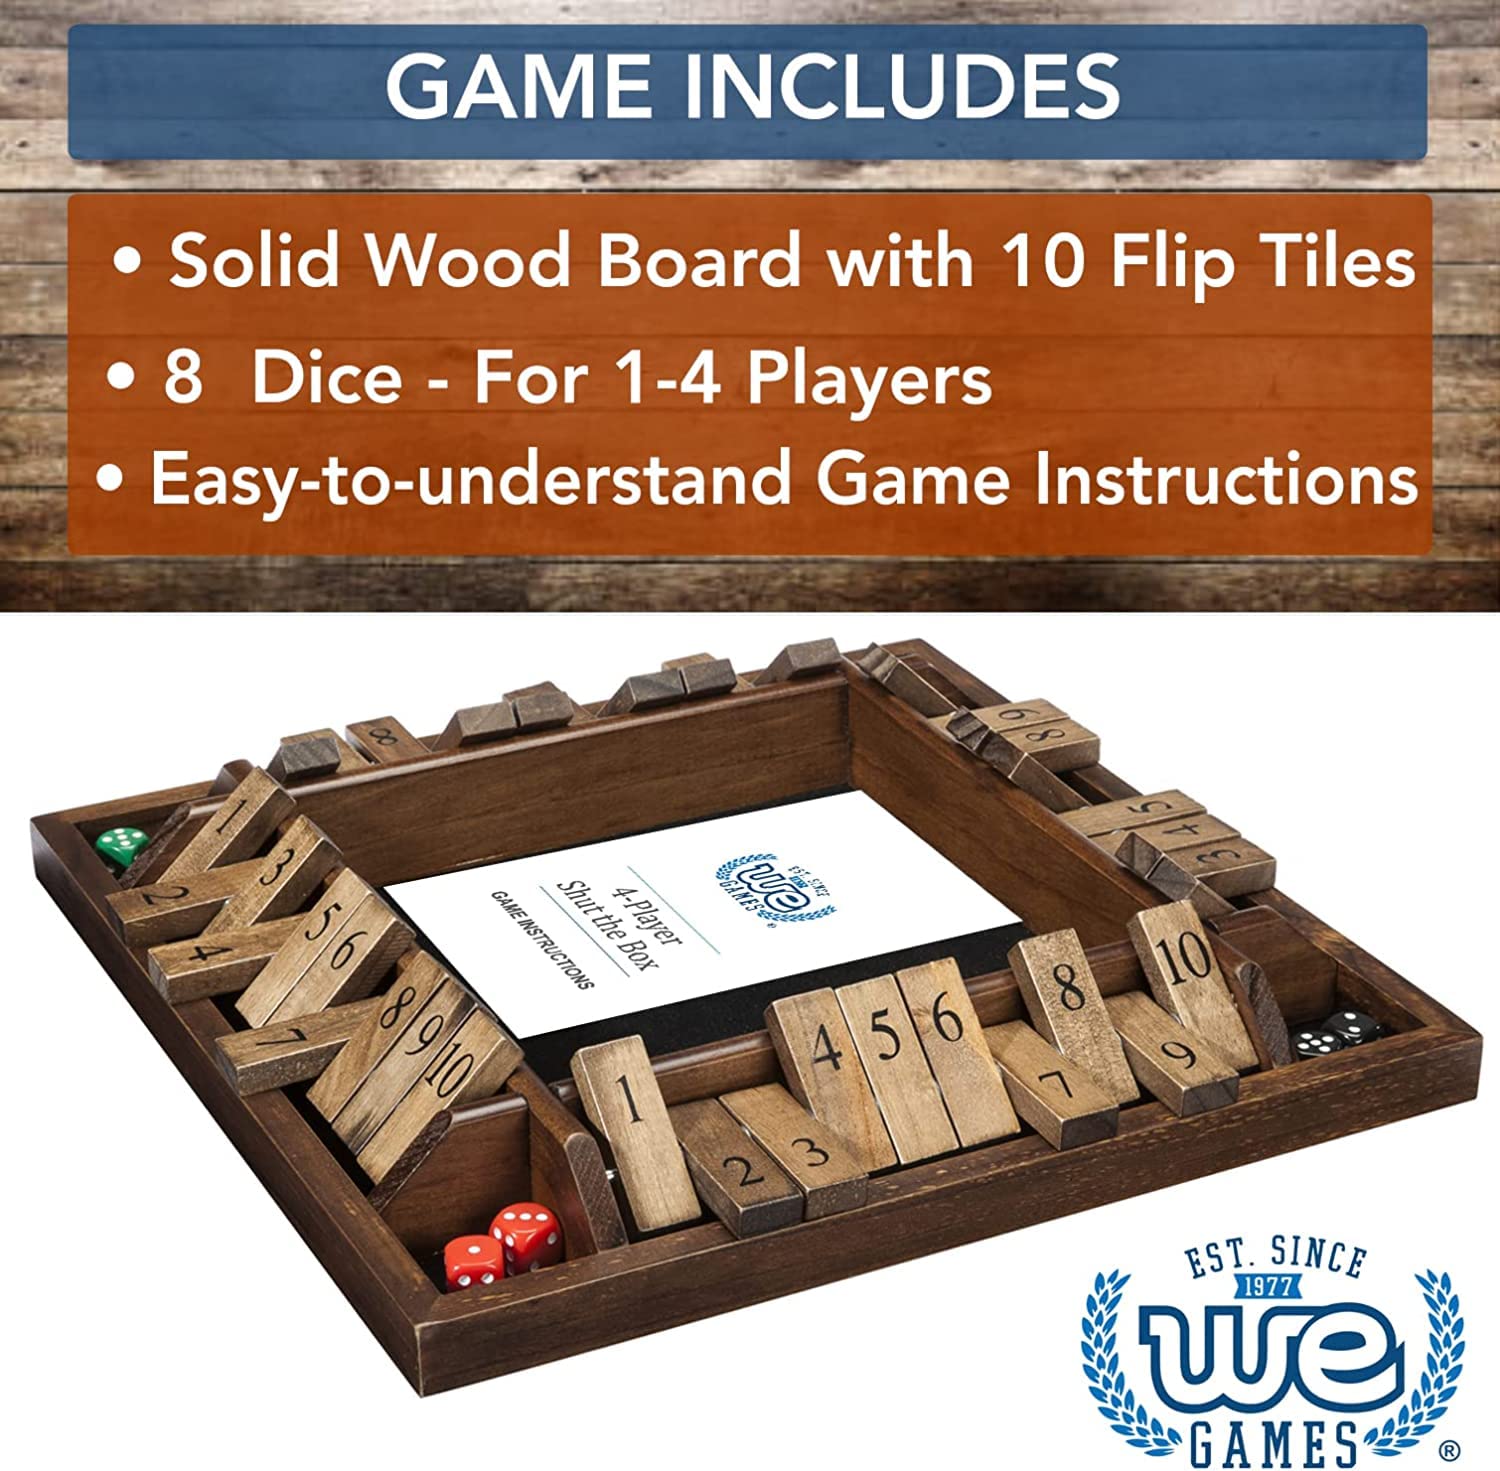 WE Games Shut The Box Wooden 1-4 Player Board Game Travel Size, The Original Table Top Dice Game for Kids and Families, Learn Math, for Classrooms, Pubs or at Home, 14 inches, Includes 8 Dice